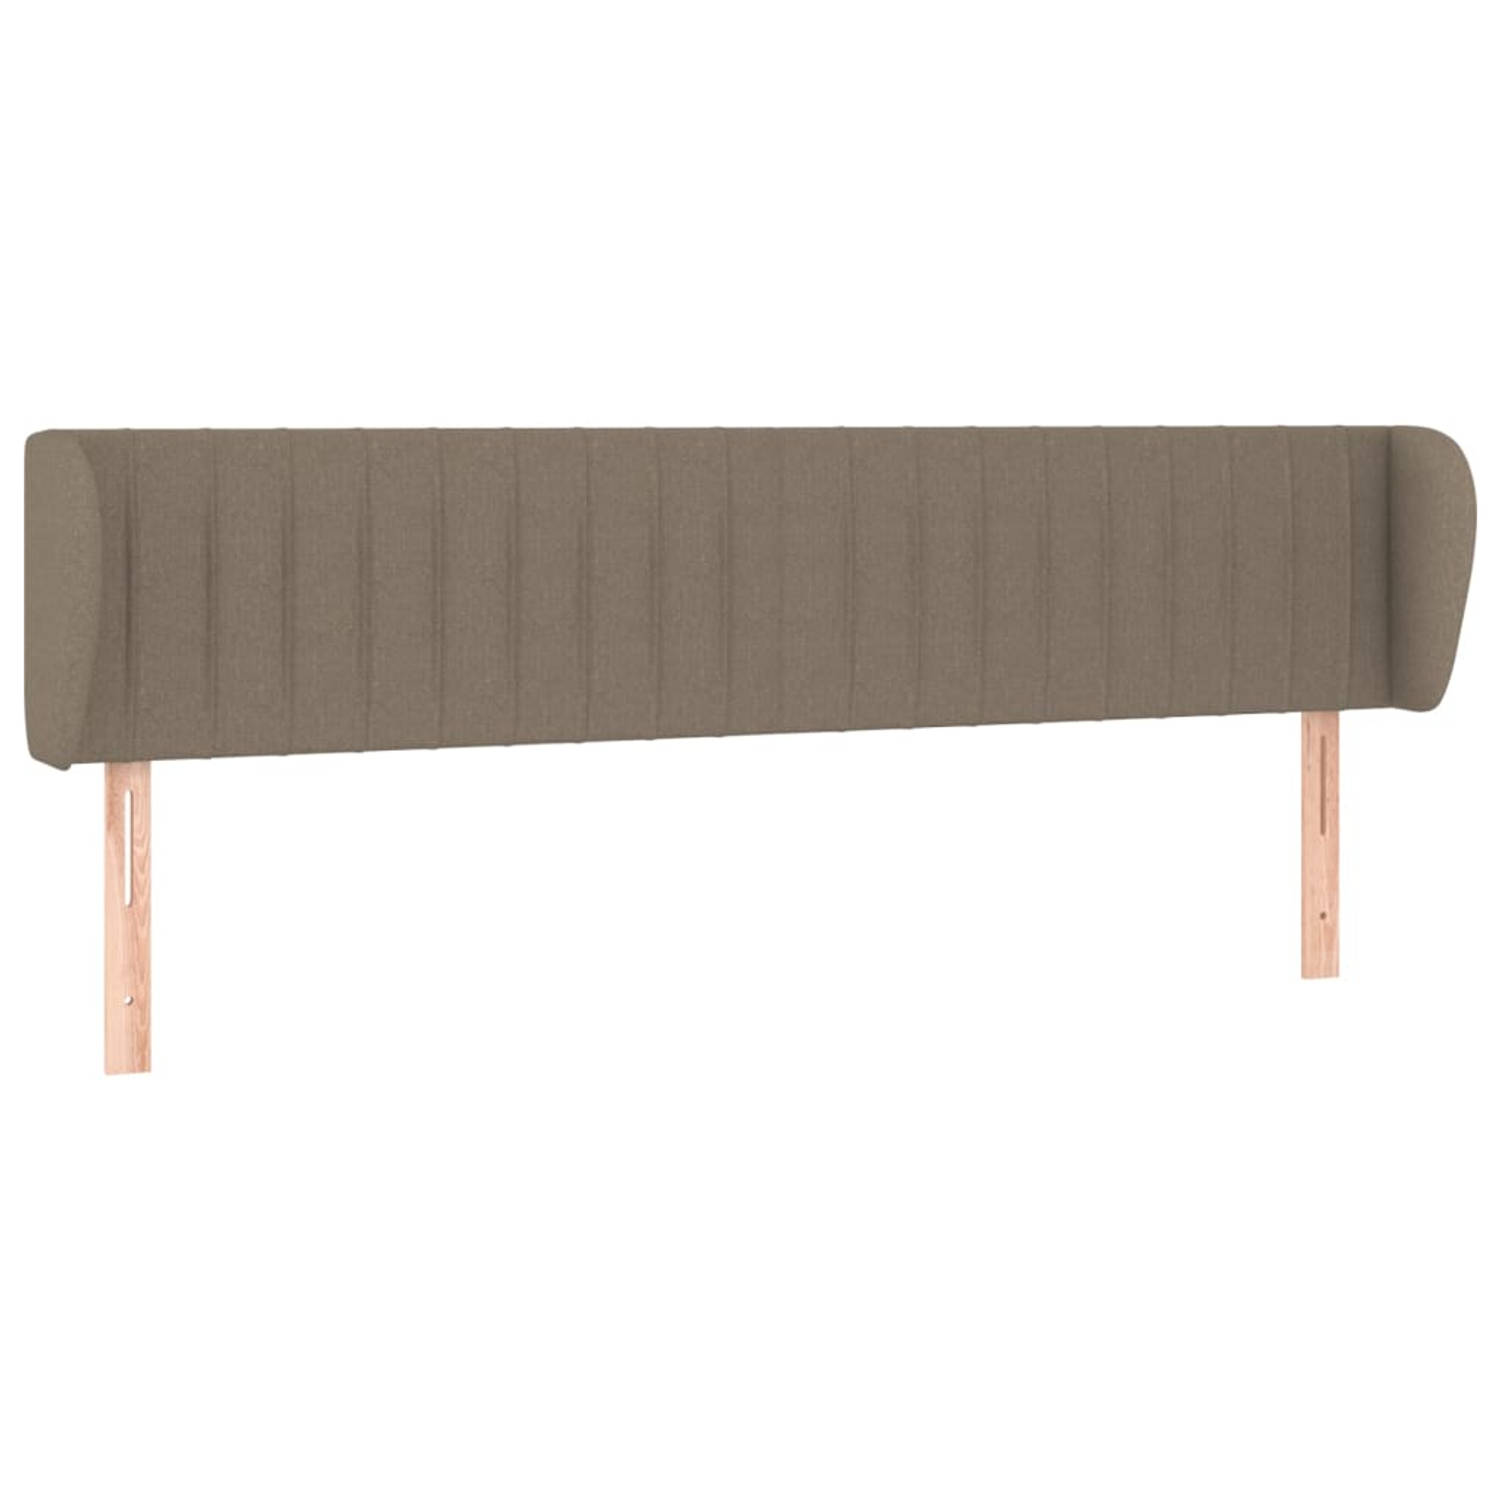 The Living Store Hoofdeind - 183x23x78/88 cm - Taupe stof - hout - Verstelbare hoogte